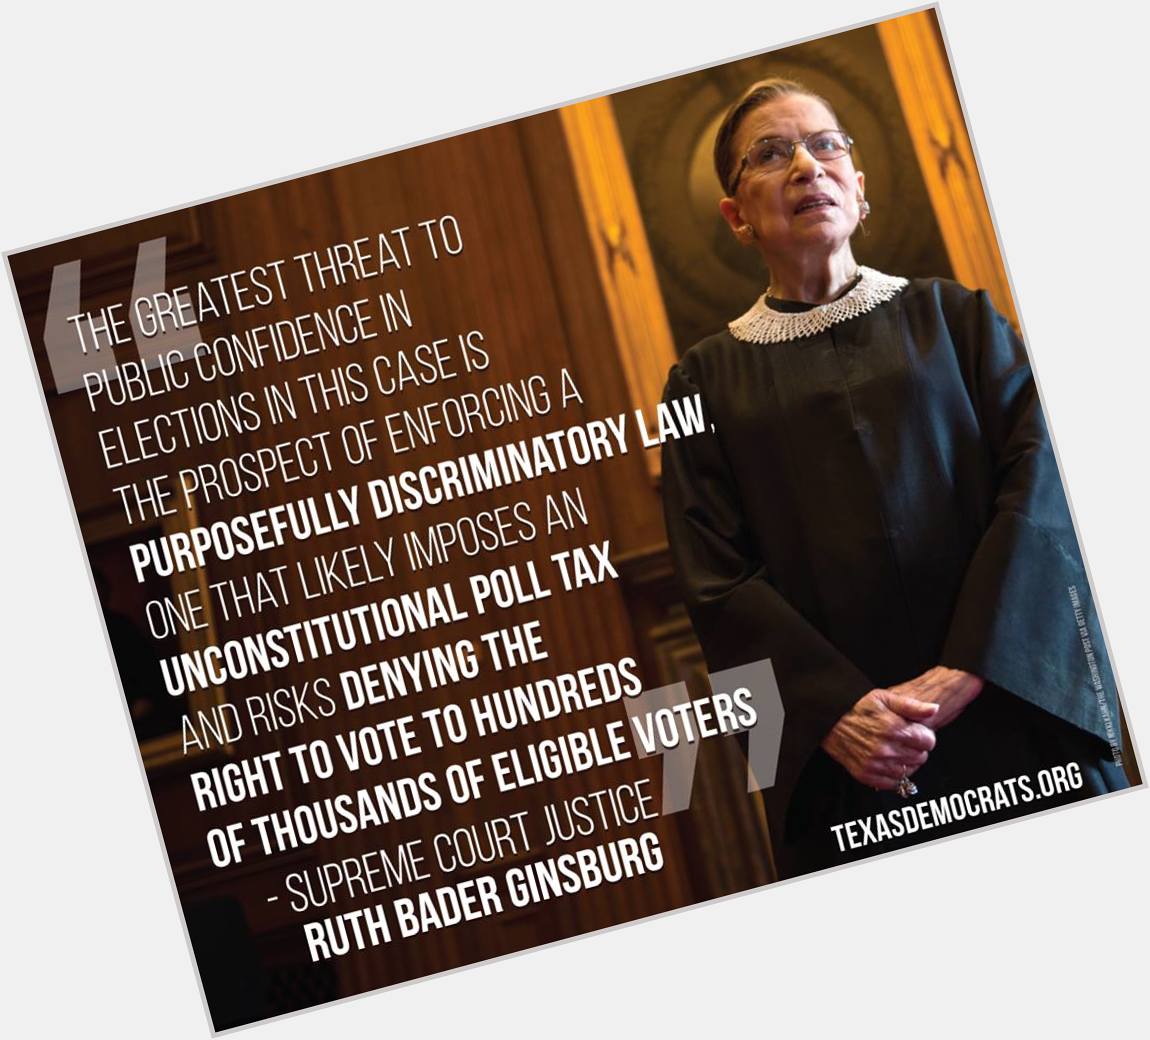  Wishing a Texas-sized Happy Birthday to Supreme Court Justice Ruth Bader Ginsburg! 